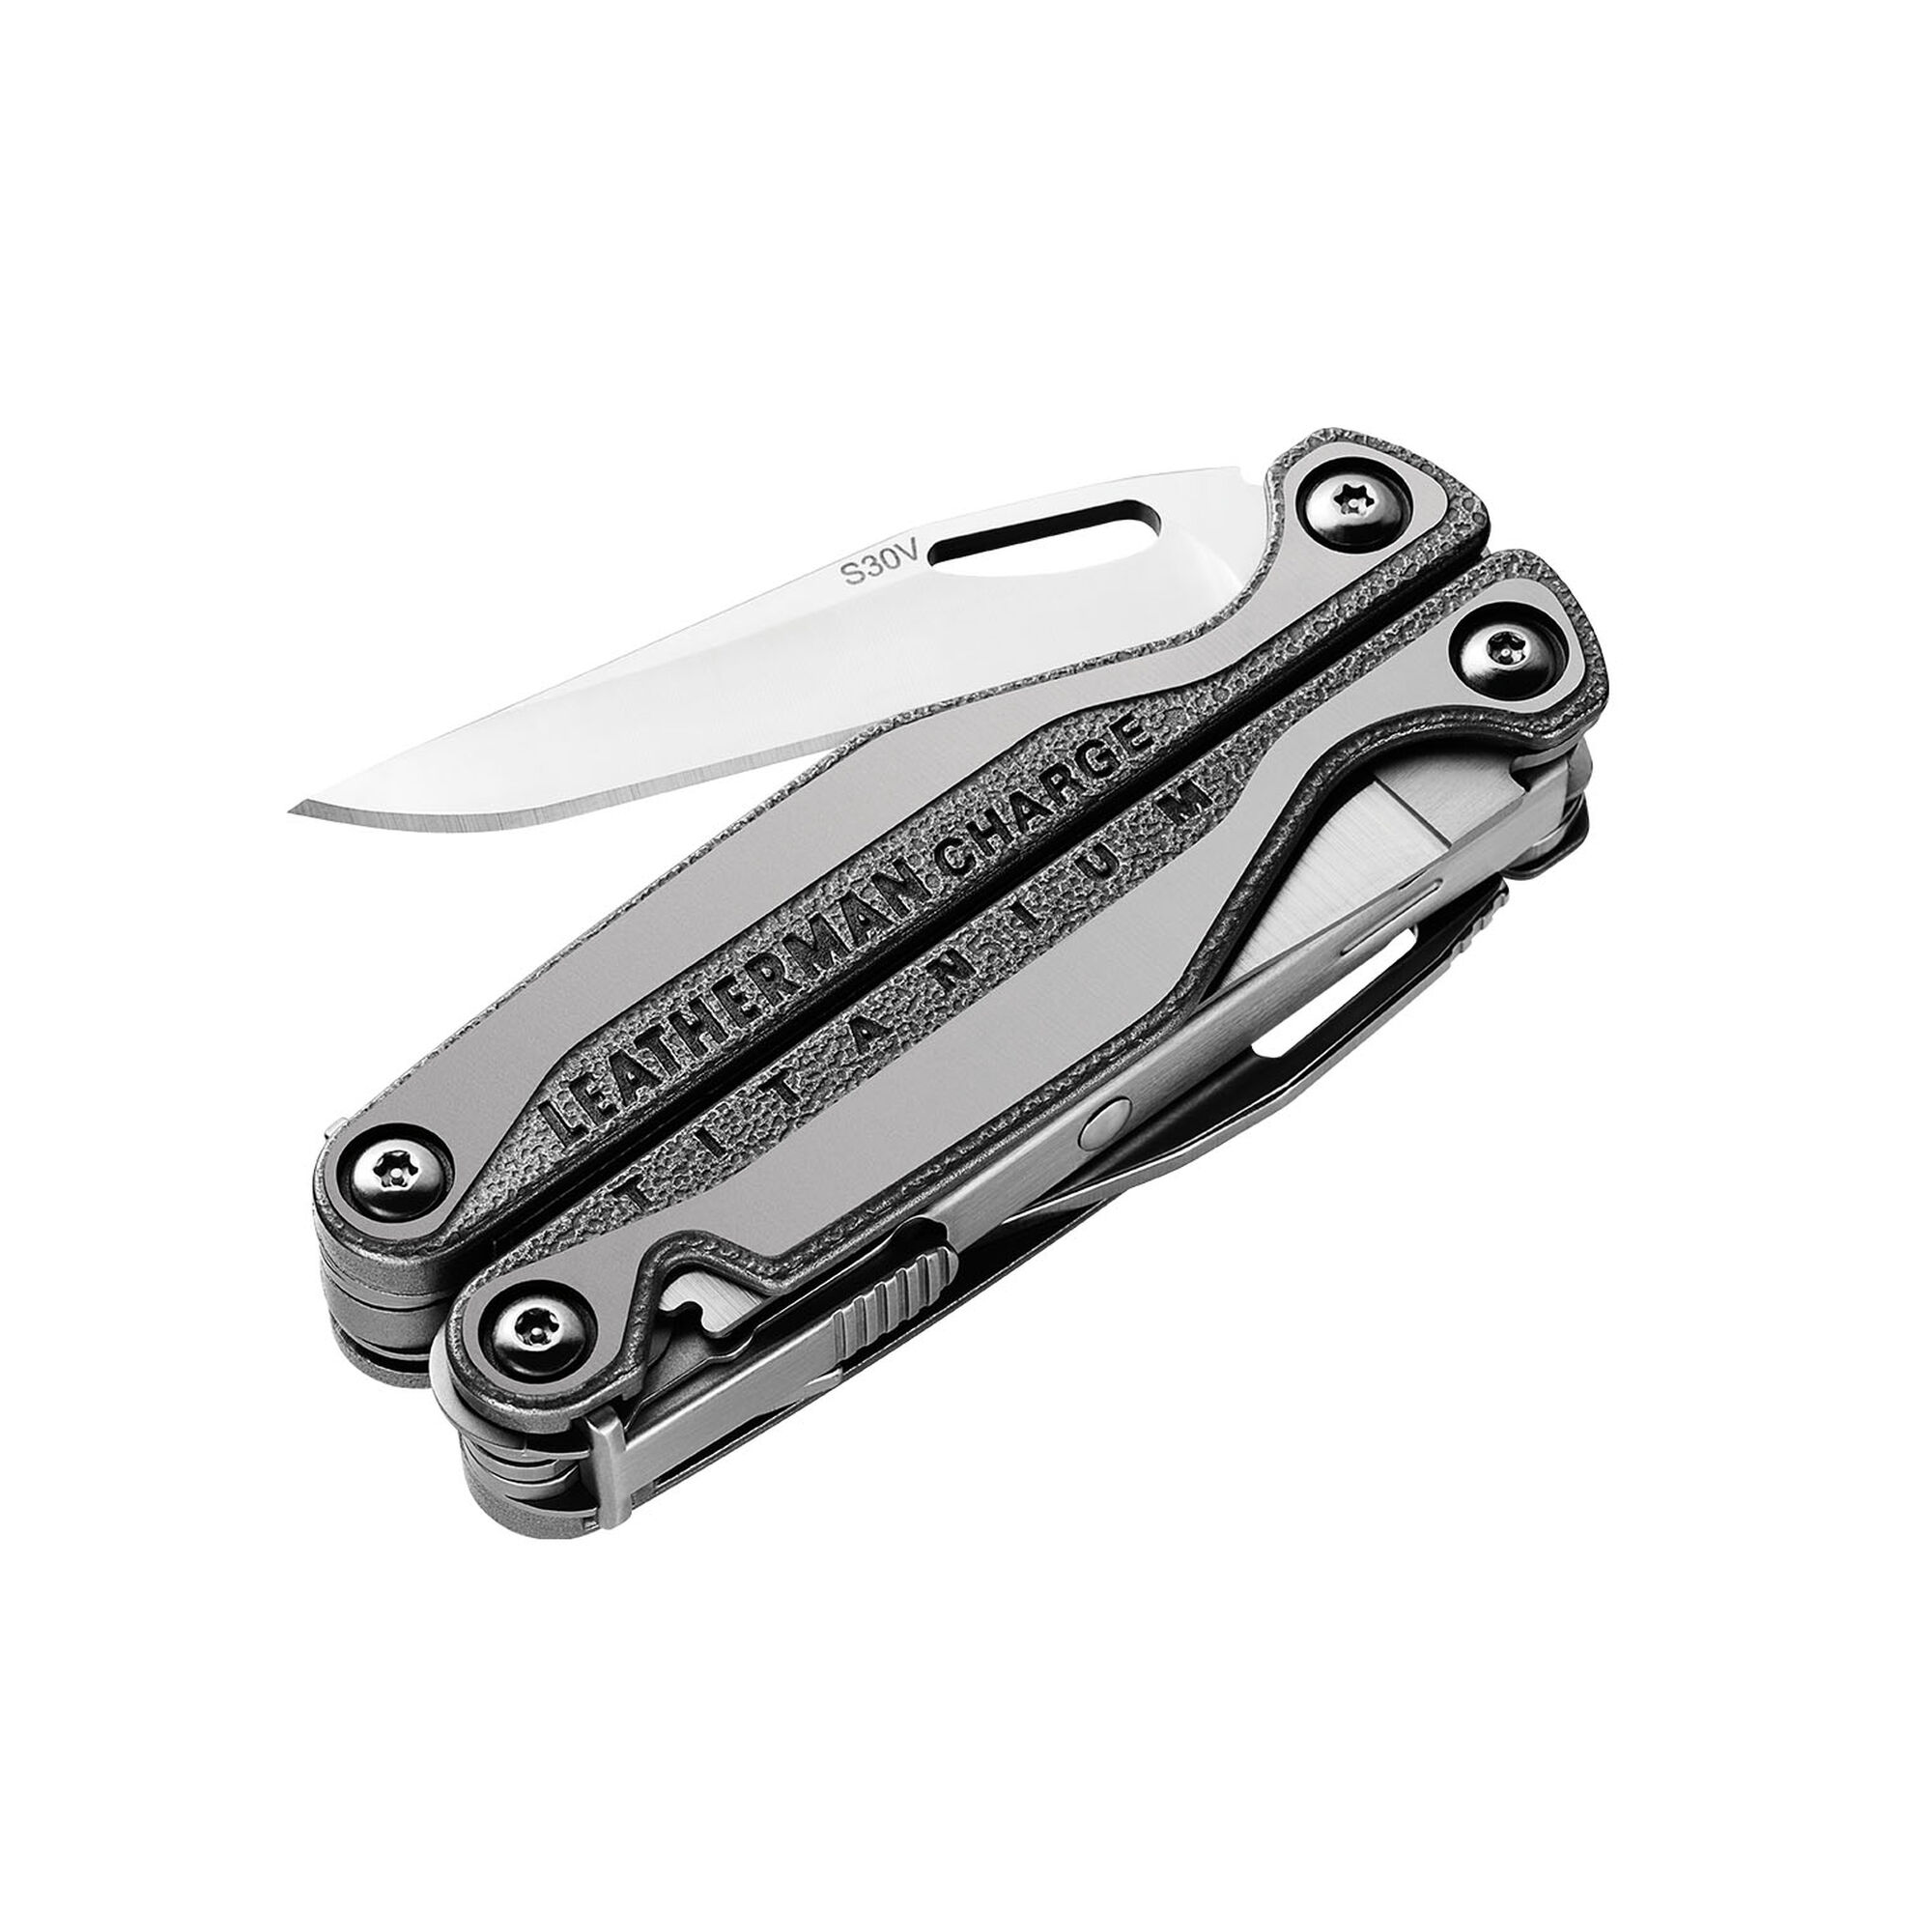 Leatherman Charge Tti Handles Replacement And Other Parts